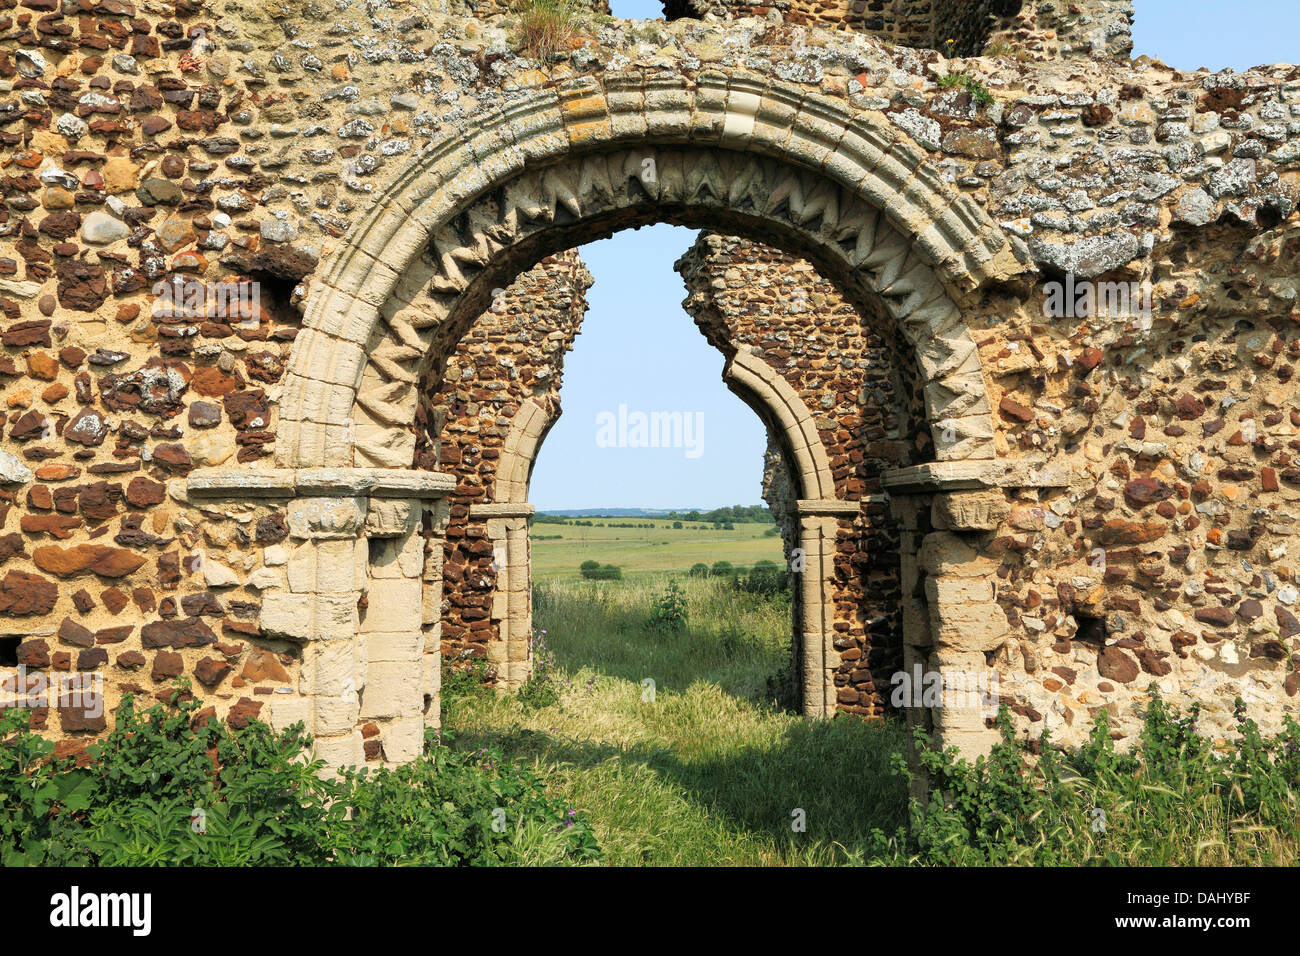 Bawsey, Norfolk, ruins of Norman church tower, arch with dog tooth decoration England UK English medieval ruined churches Stock Photo